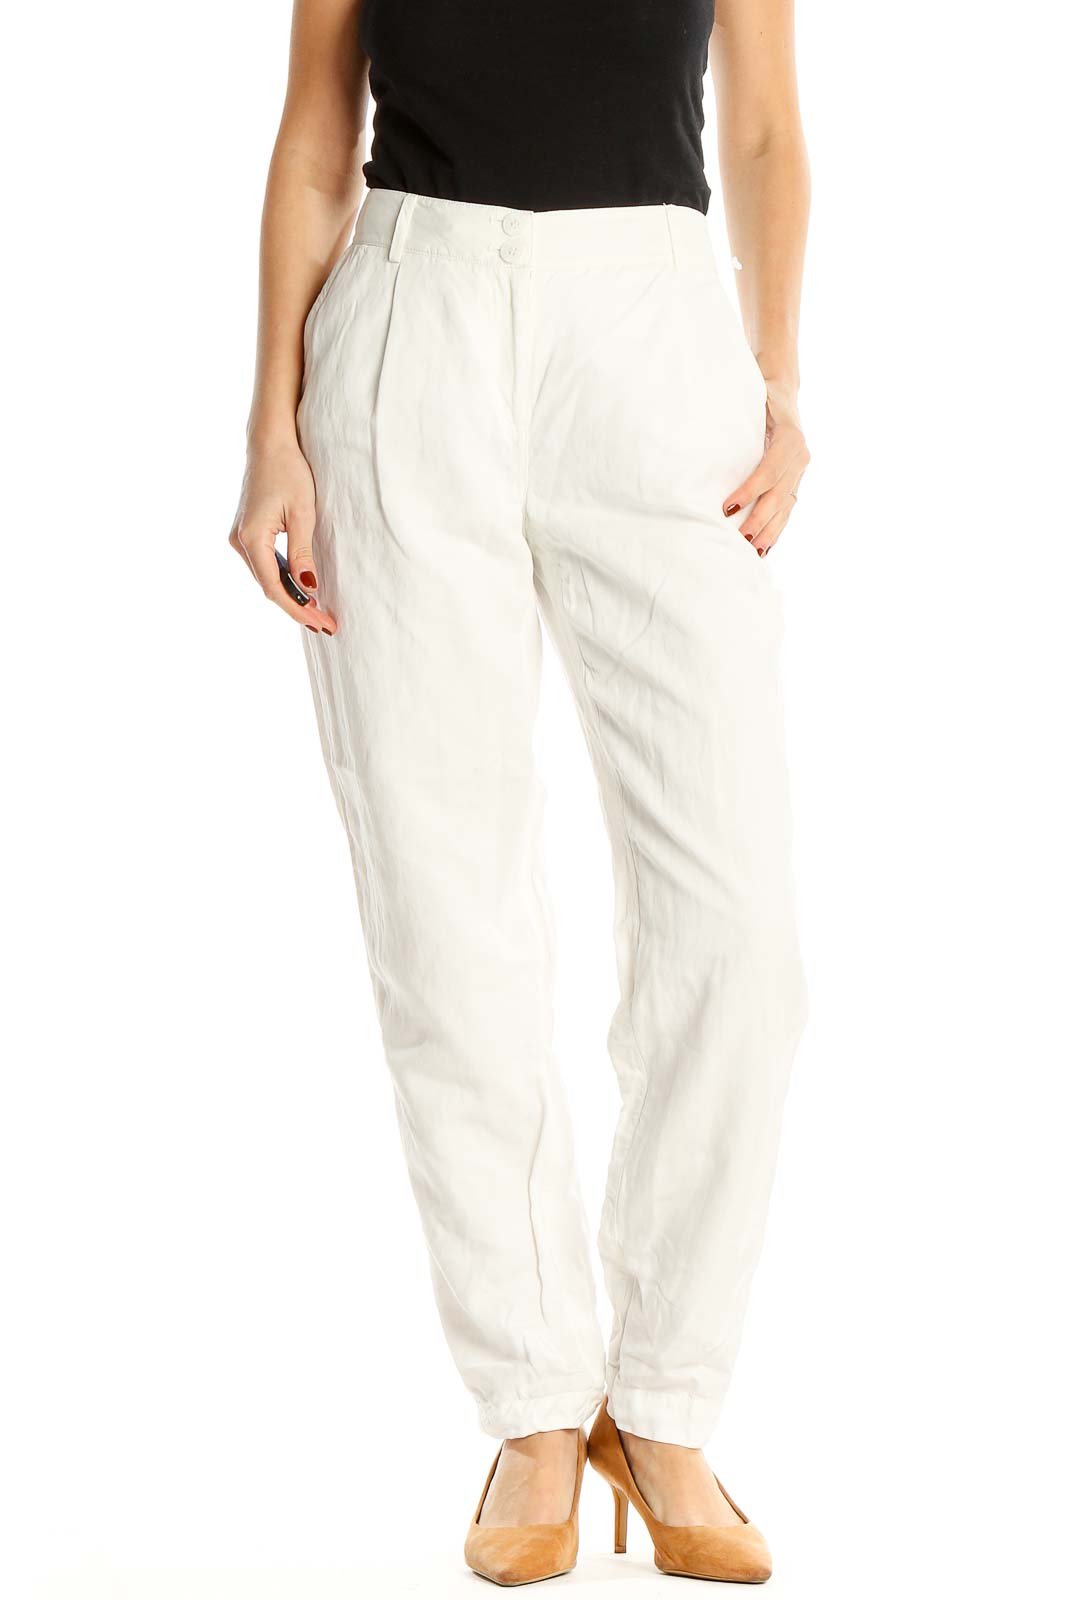 White Cotton Linen All Day Wear Pants Front